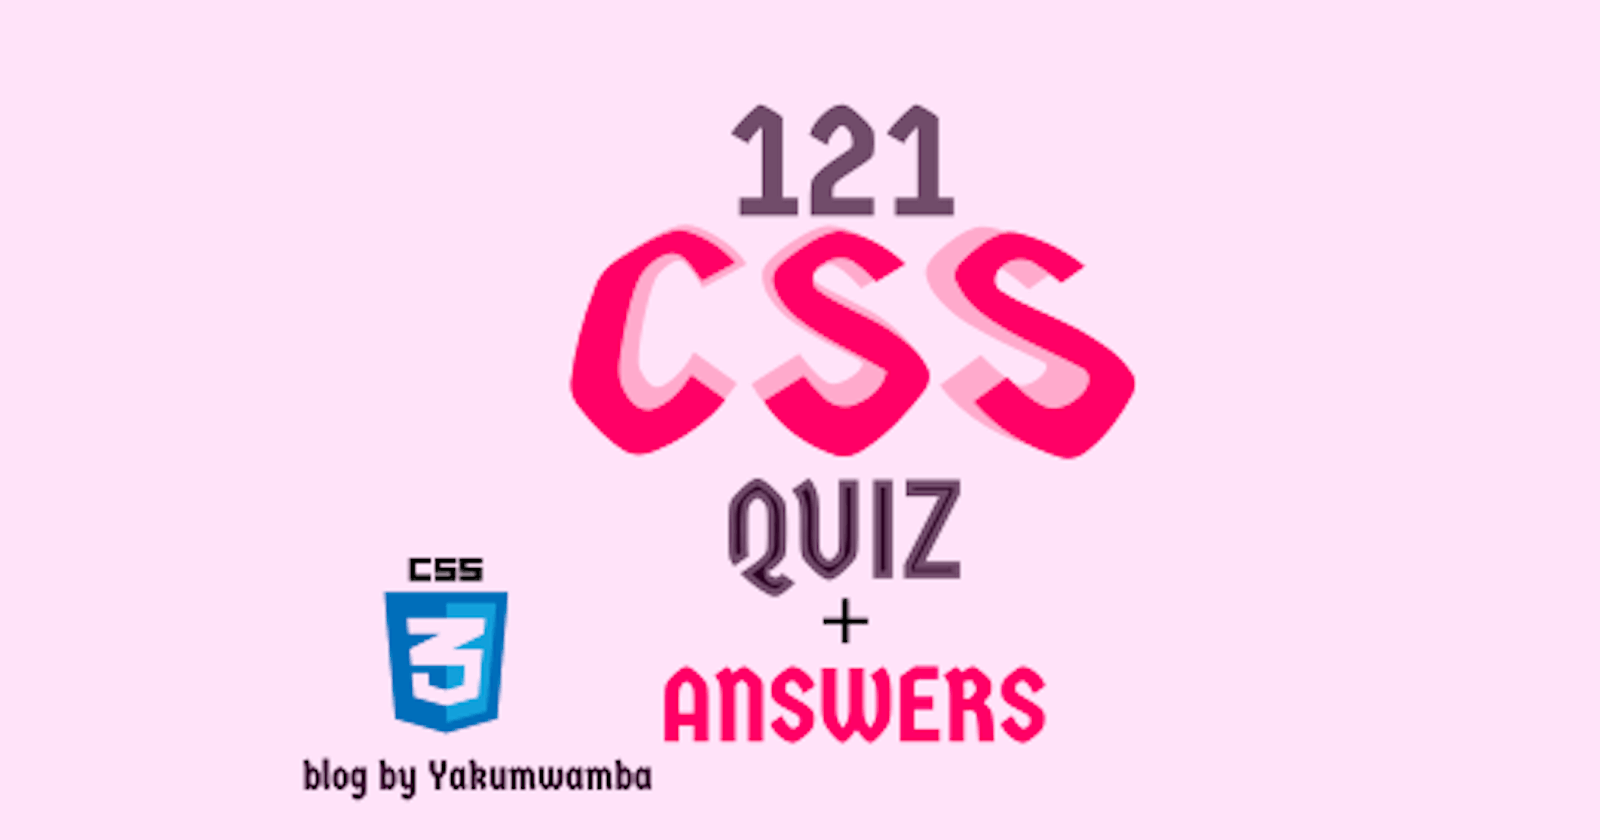 121 CSS Quiz Questions 🤸🤸 that will send you flying  from Zero to a 100 in style 😎